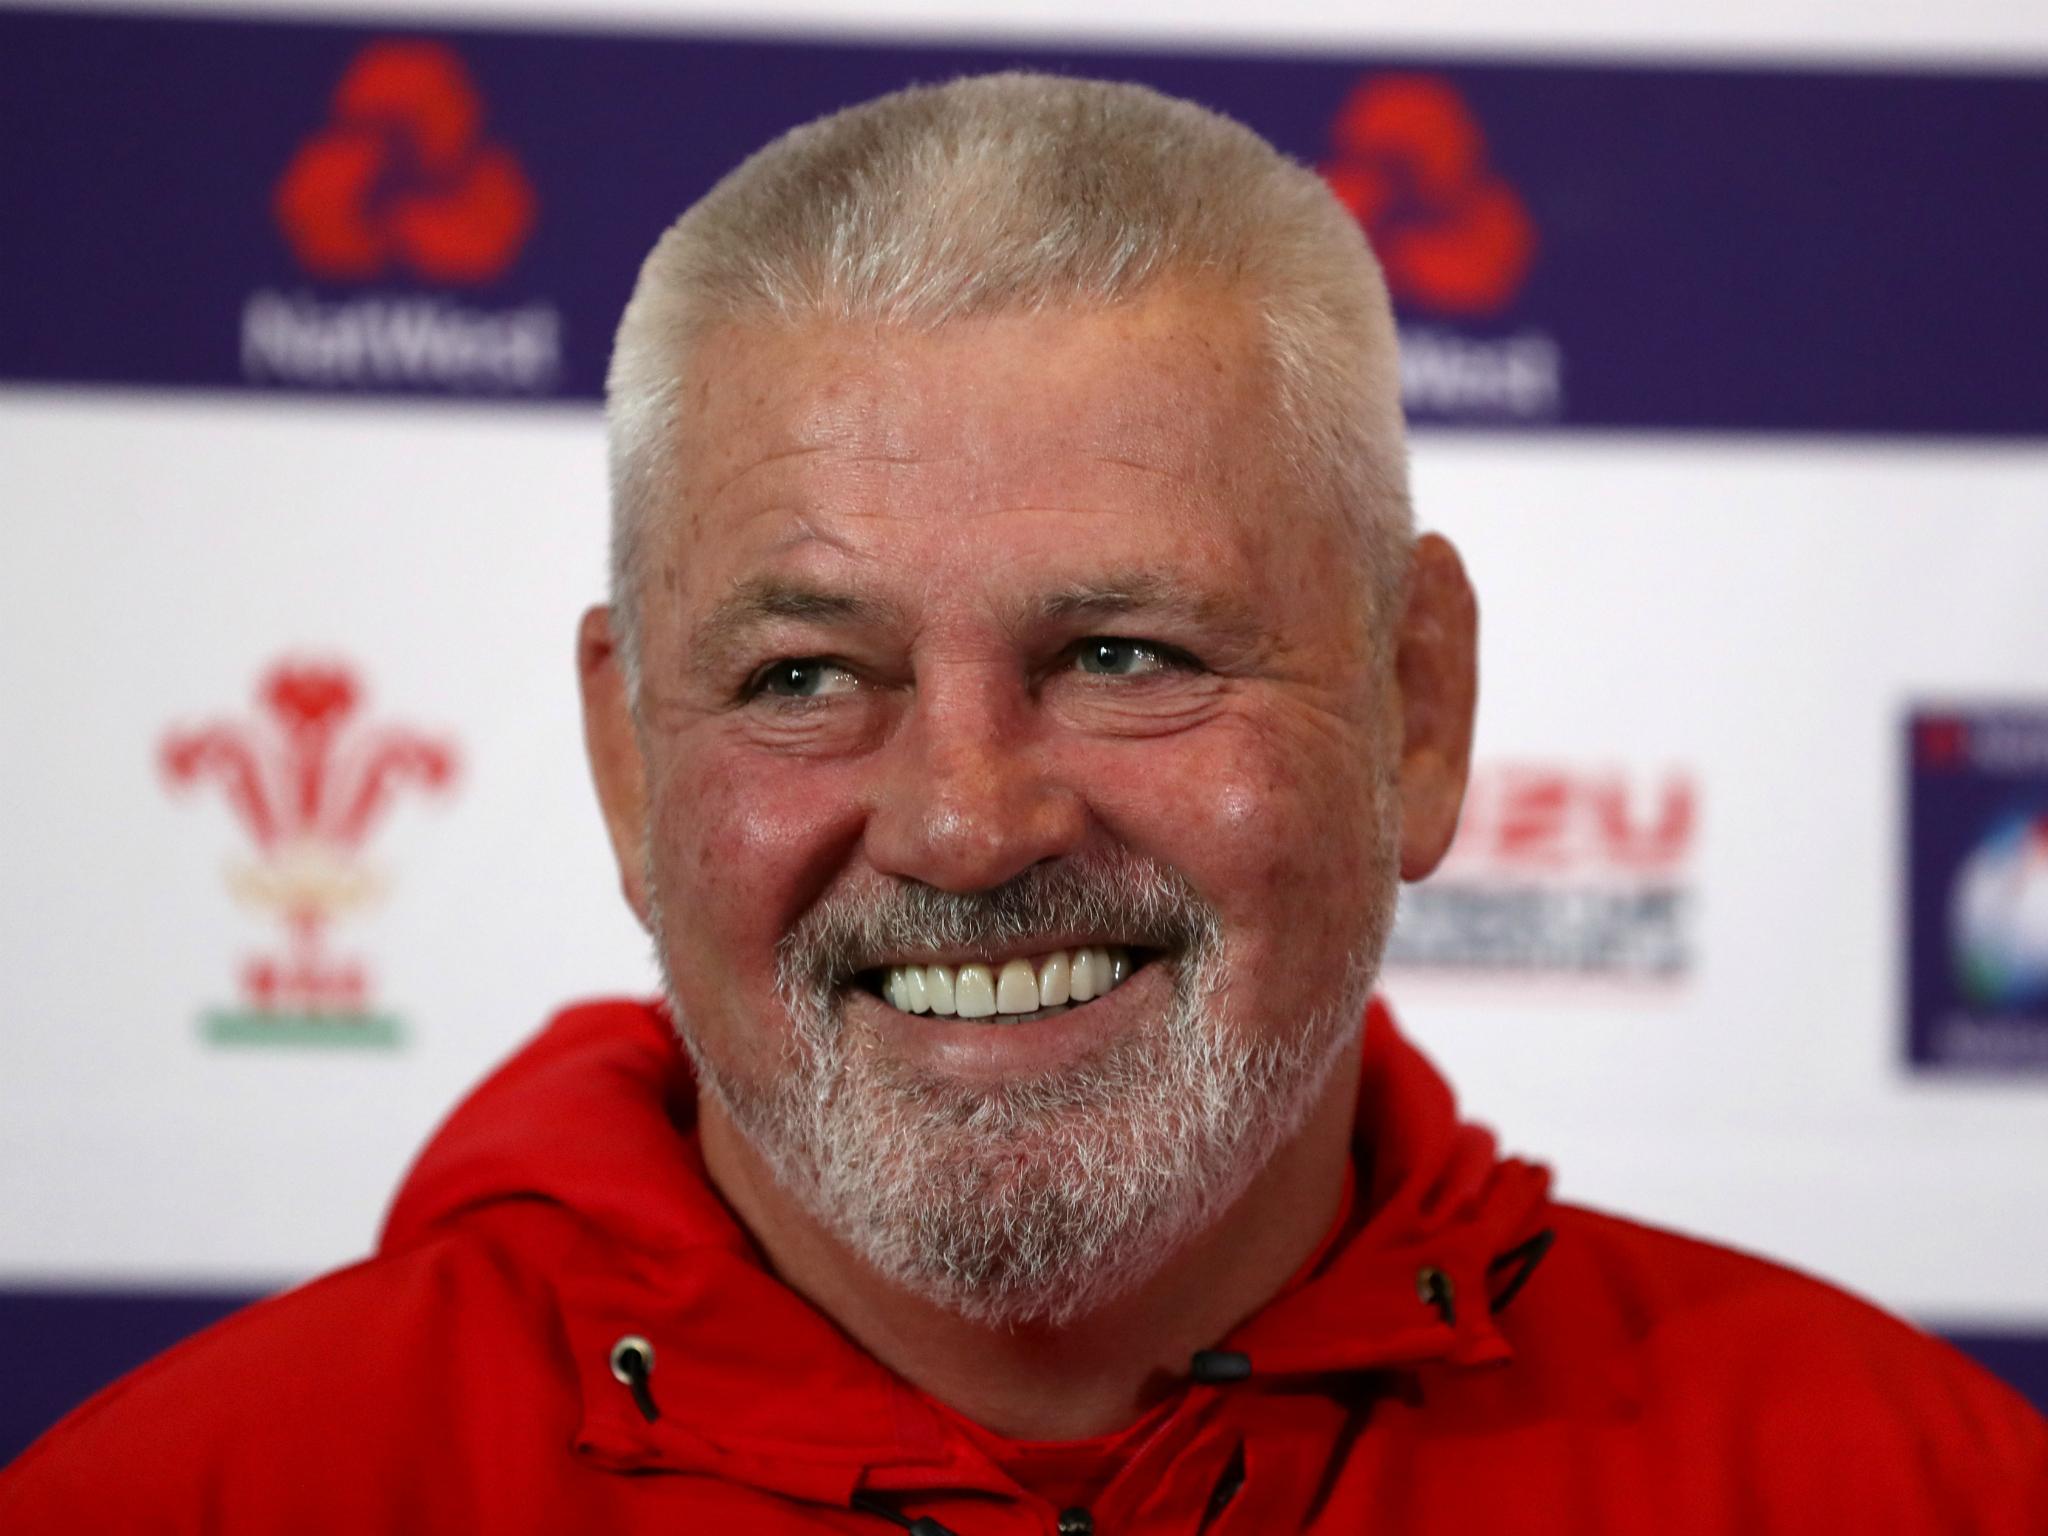 Gatland is looking to repeat Wales' 2015 victory over England at Twickenham